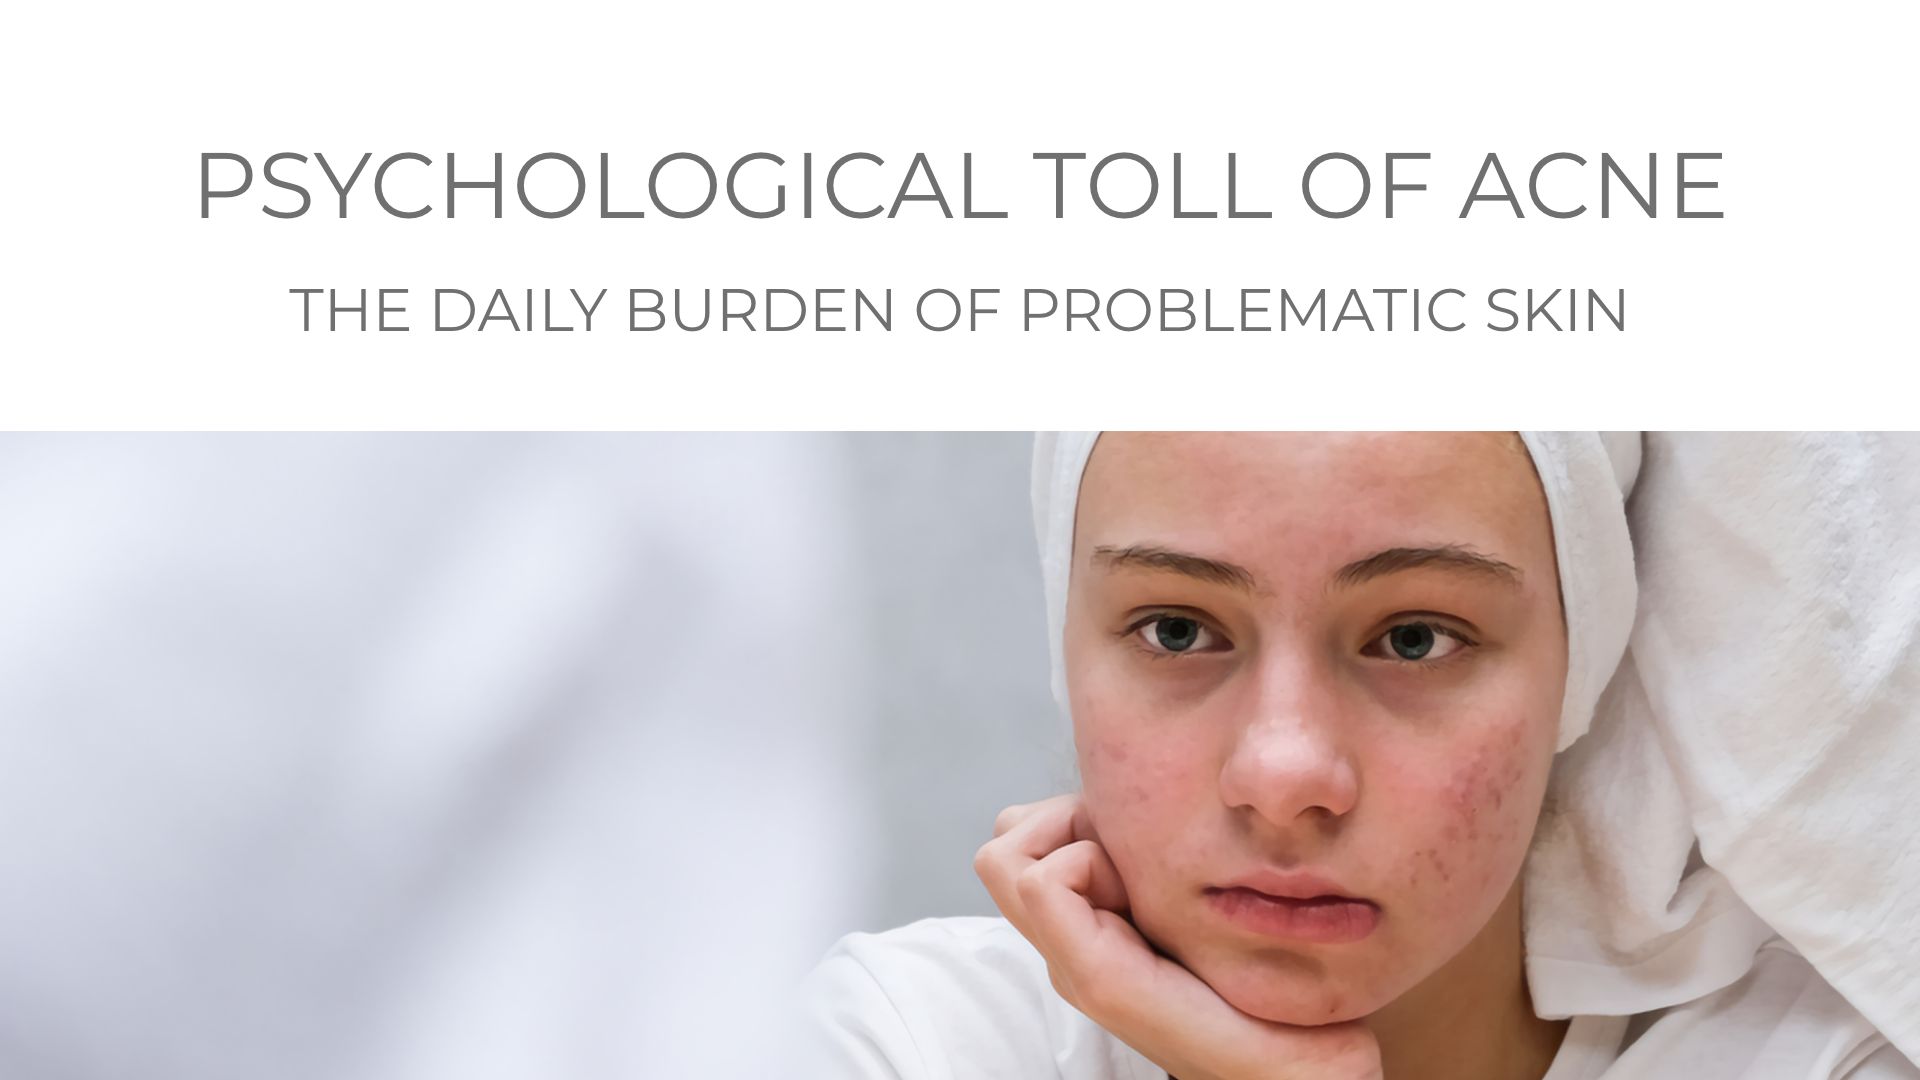 Facial redness and inflammatory acne lesions depicting psychological effects